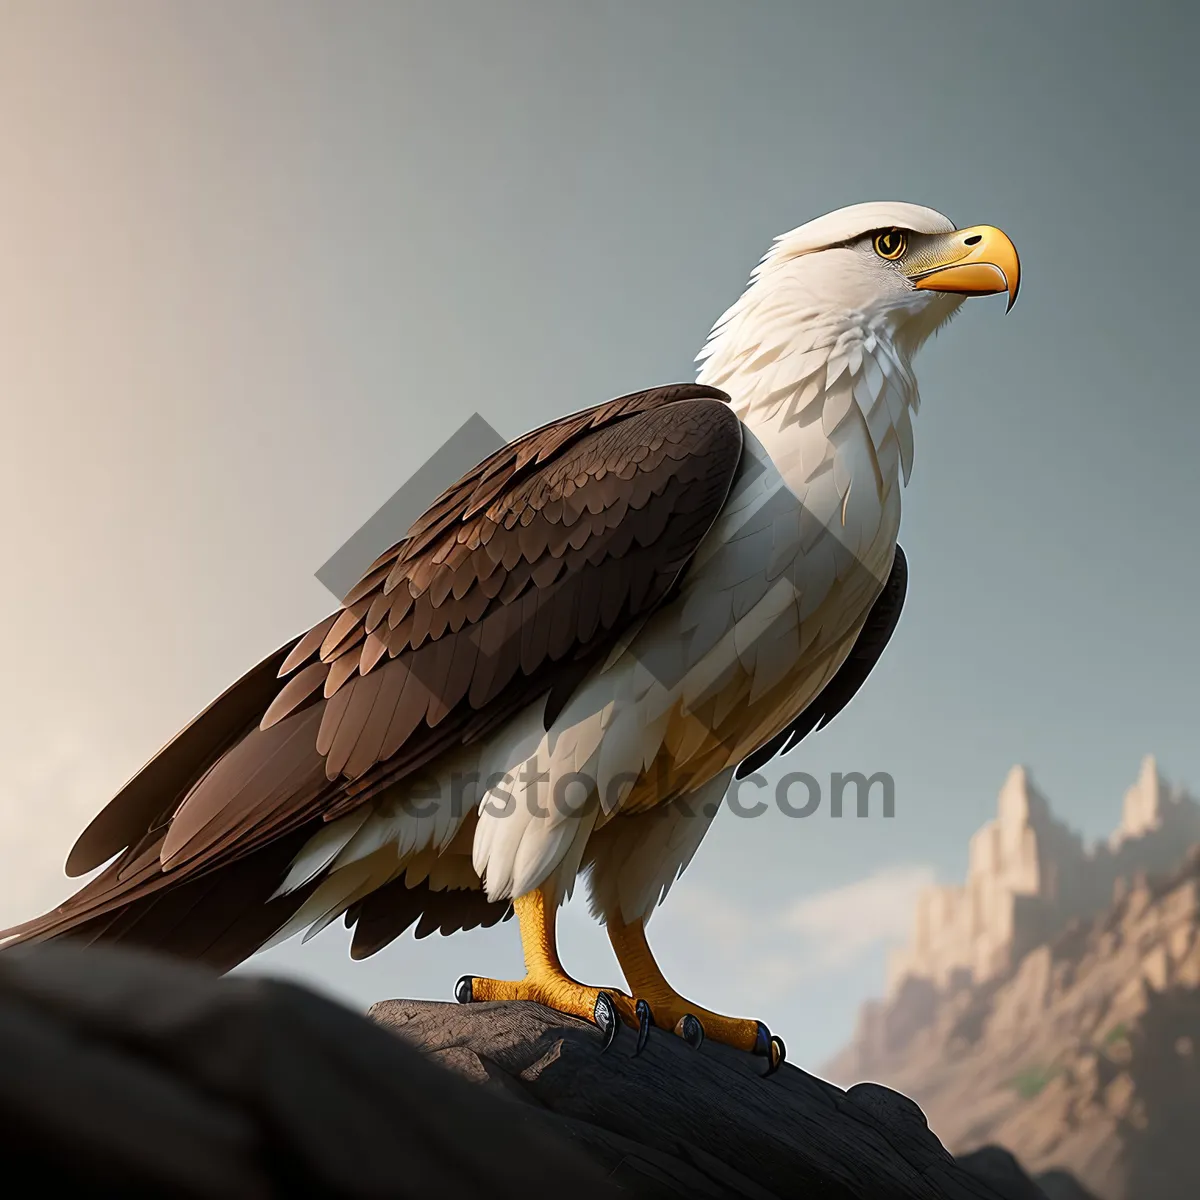 Picture of Majestic Hunter: Bald Eagle Soaring with Feathers Spread